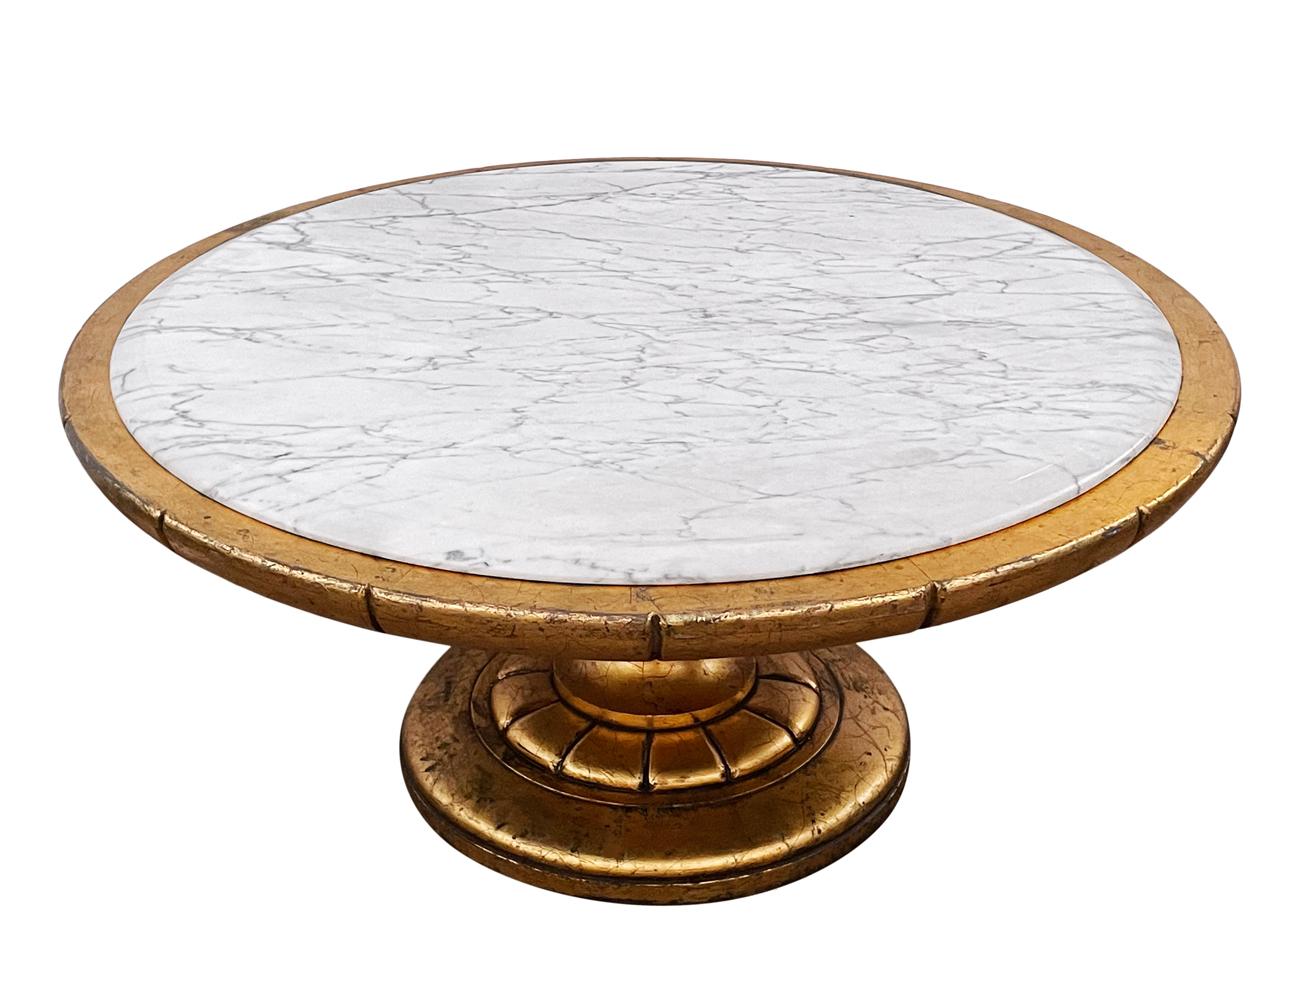 American Hollywood Regency Round Cocktail Table in Gold & Marble in Style of James Mont 